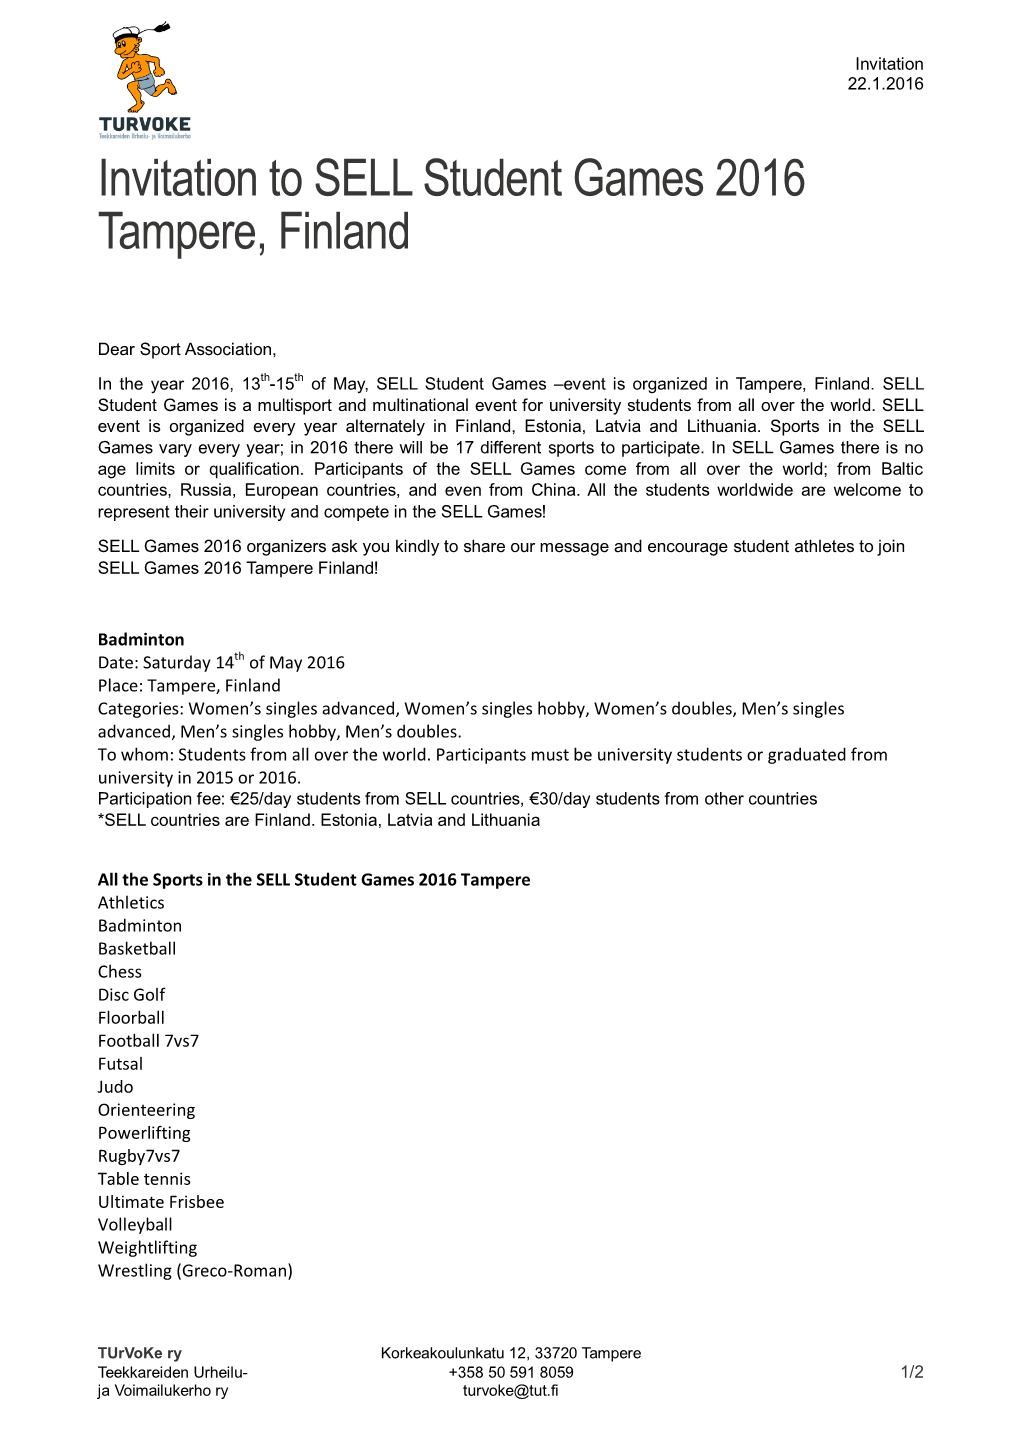 Invitation to SELL Student Games 2016 Tampere, Finland